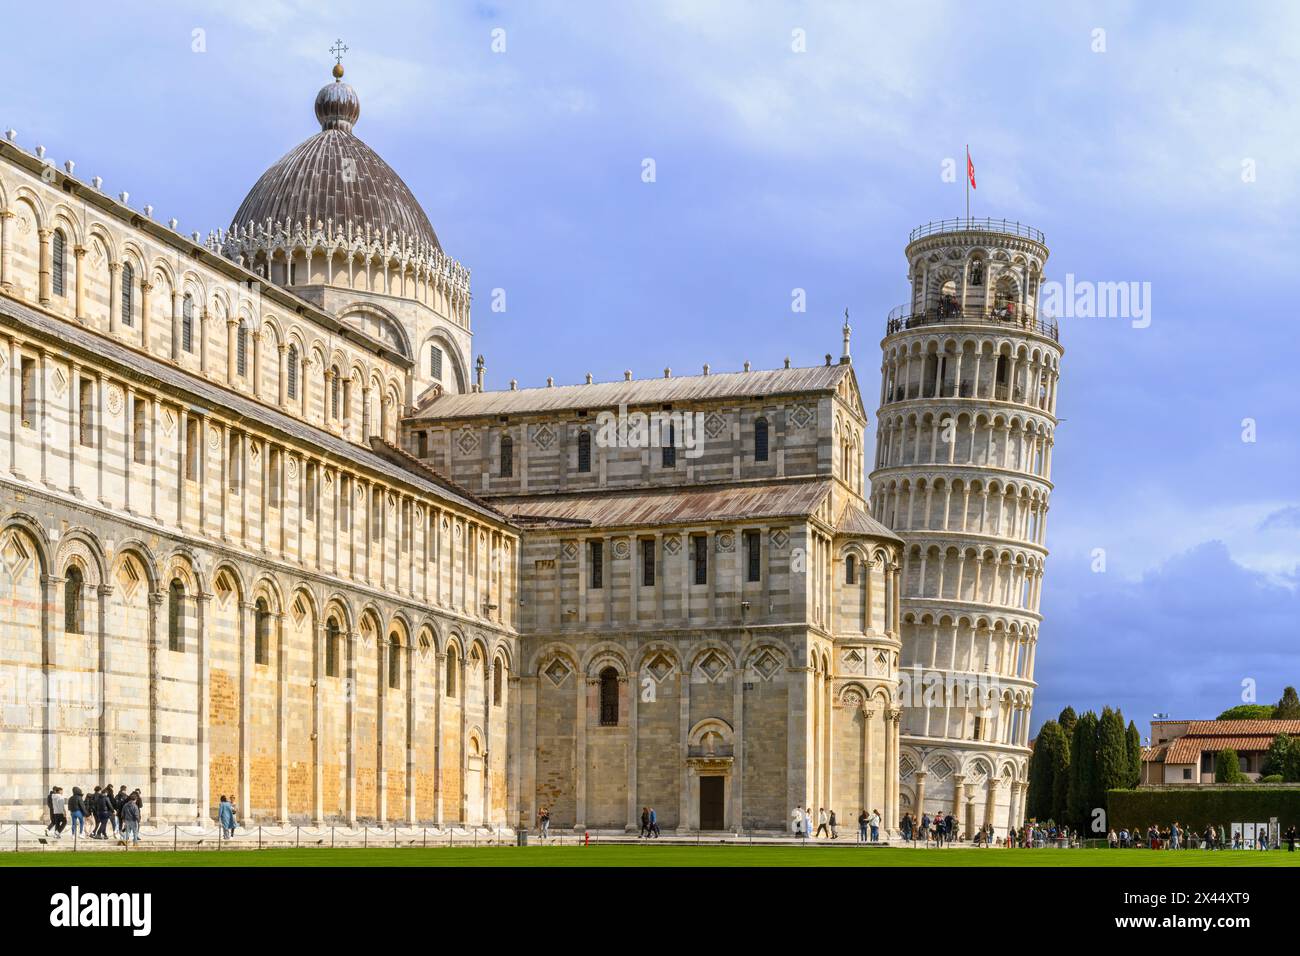 Leaning Tower of Pisa, Torre di Pisa. The bell tower's lean in the 12th century was 4°. By 1900 it was 5.5°. it is now stabilised to under 4°. Stock Photo